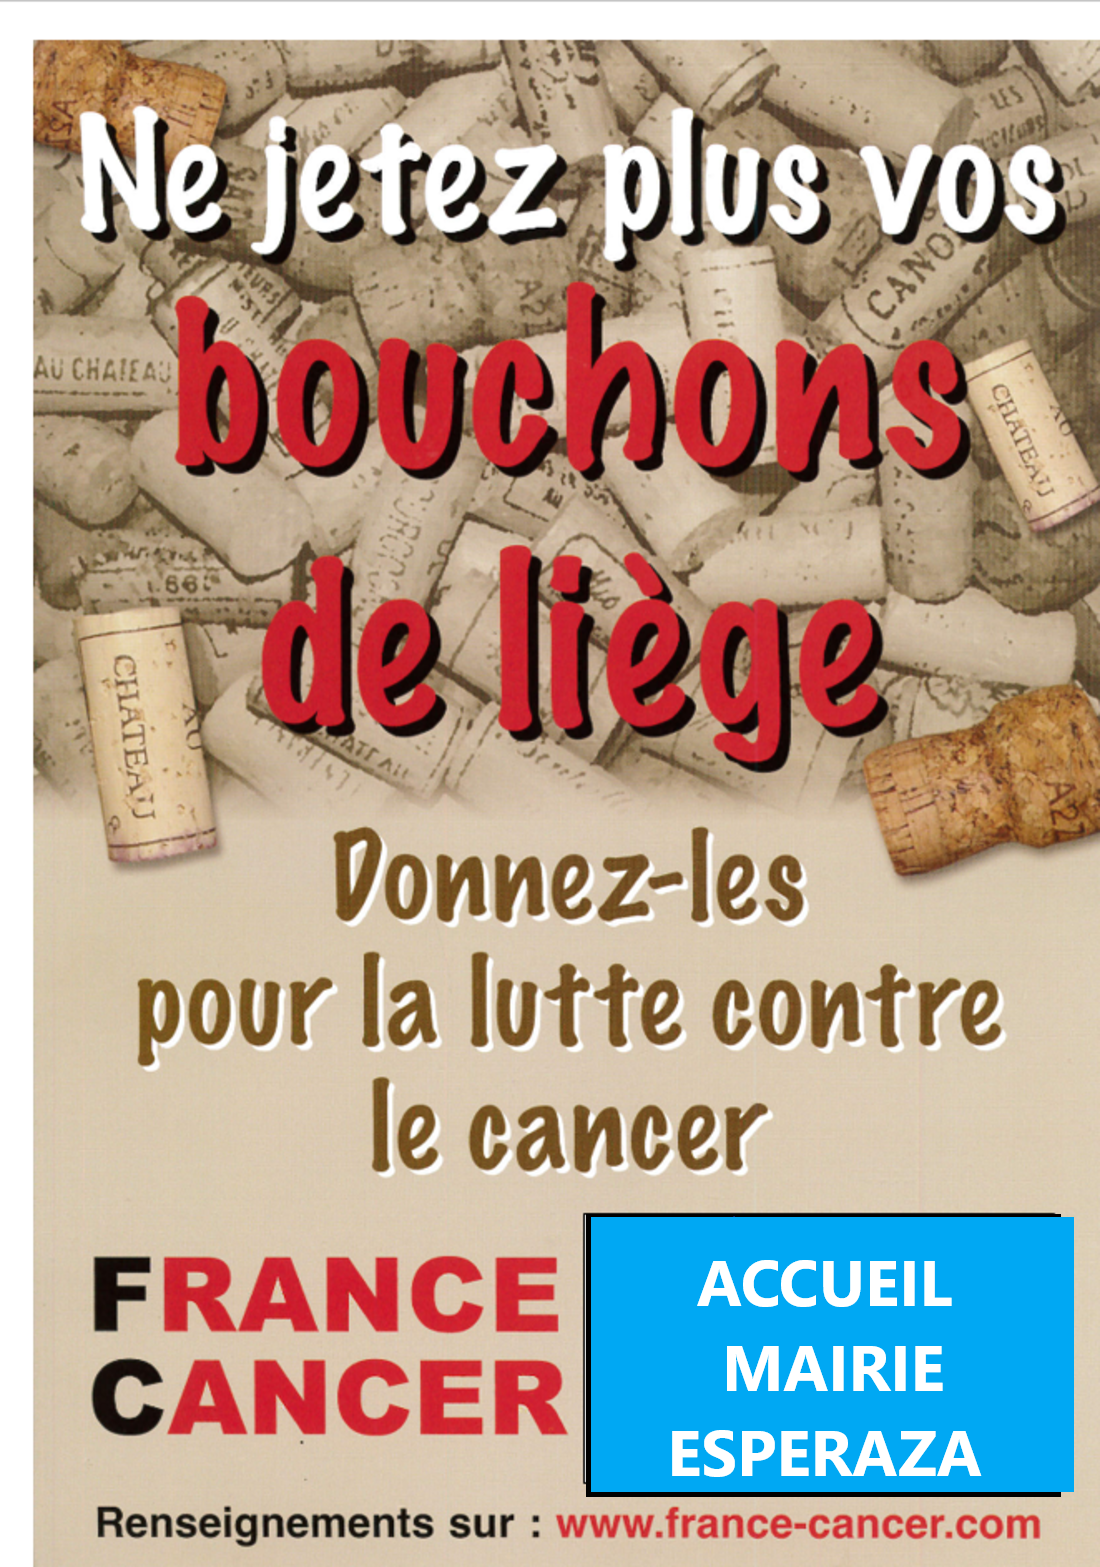 bouchons_france_cancer_17-05-2018-png - Copie.png